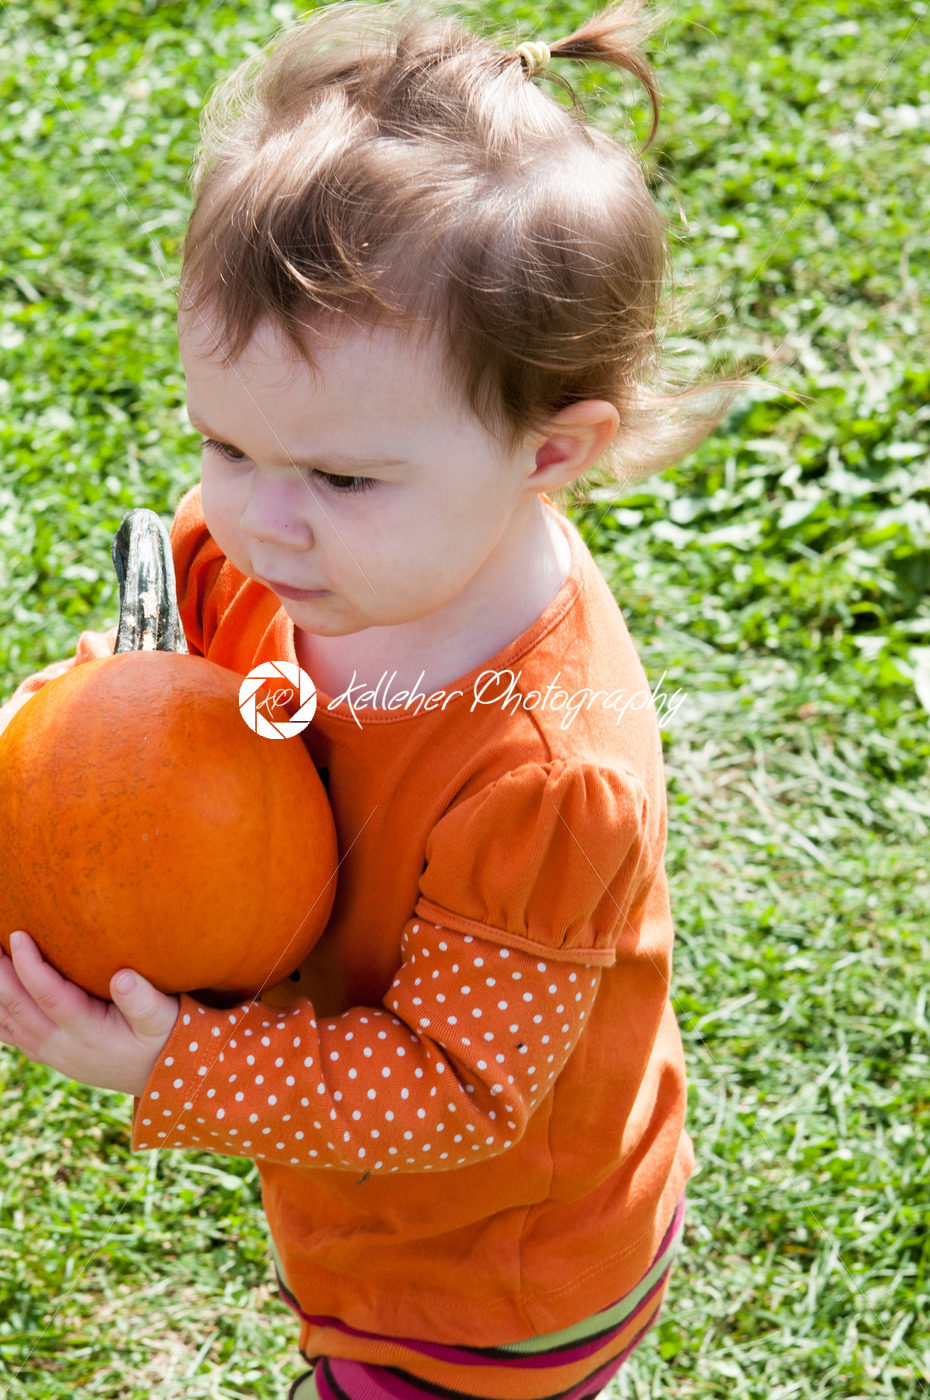 Young toddler girl outside holding a pumpkin - Kelleher Photography Store